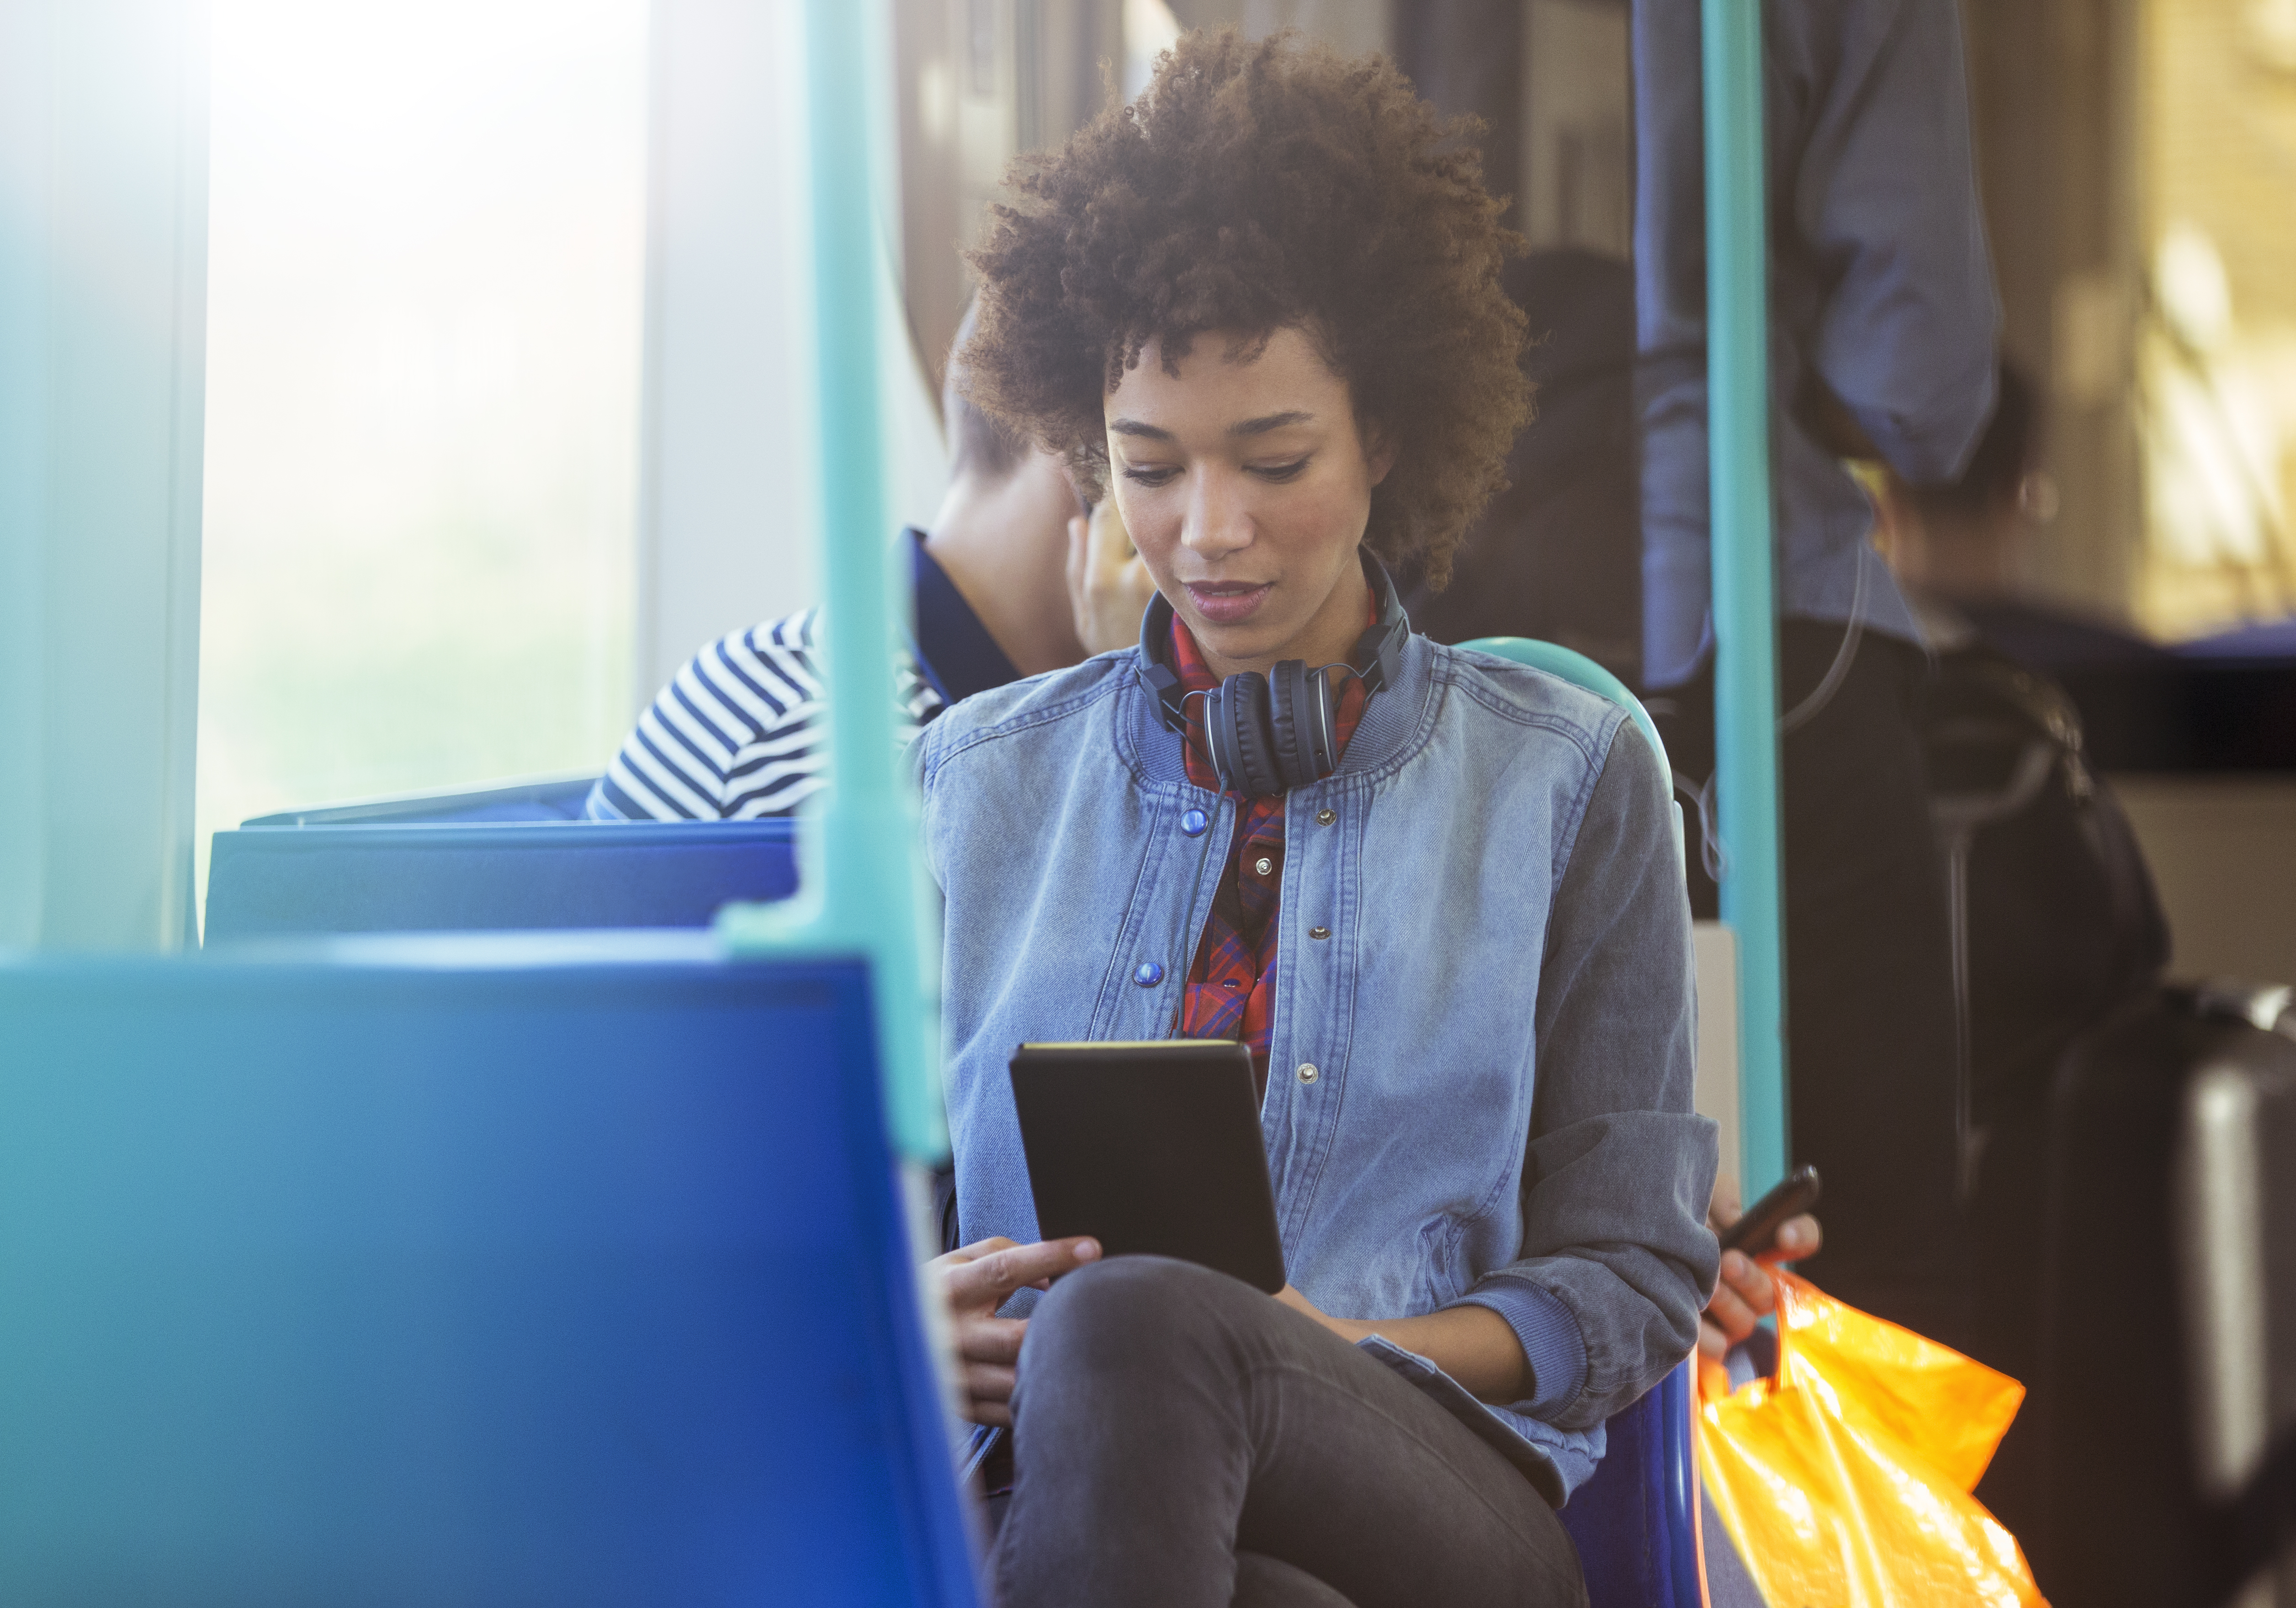 woman sitting on bus with headphones and tablet